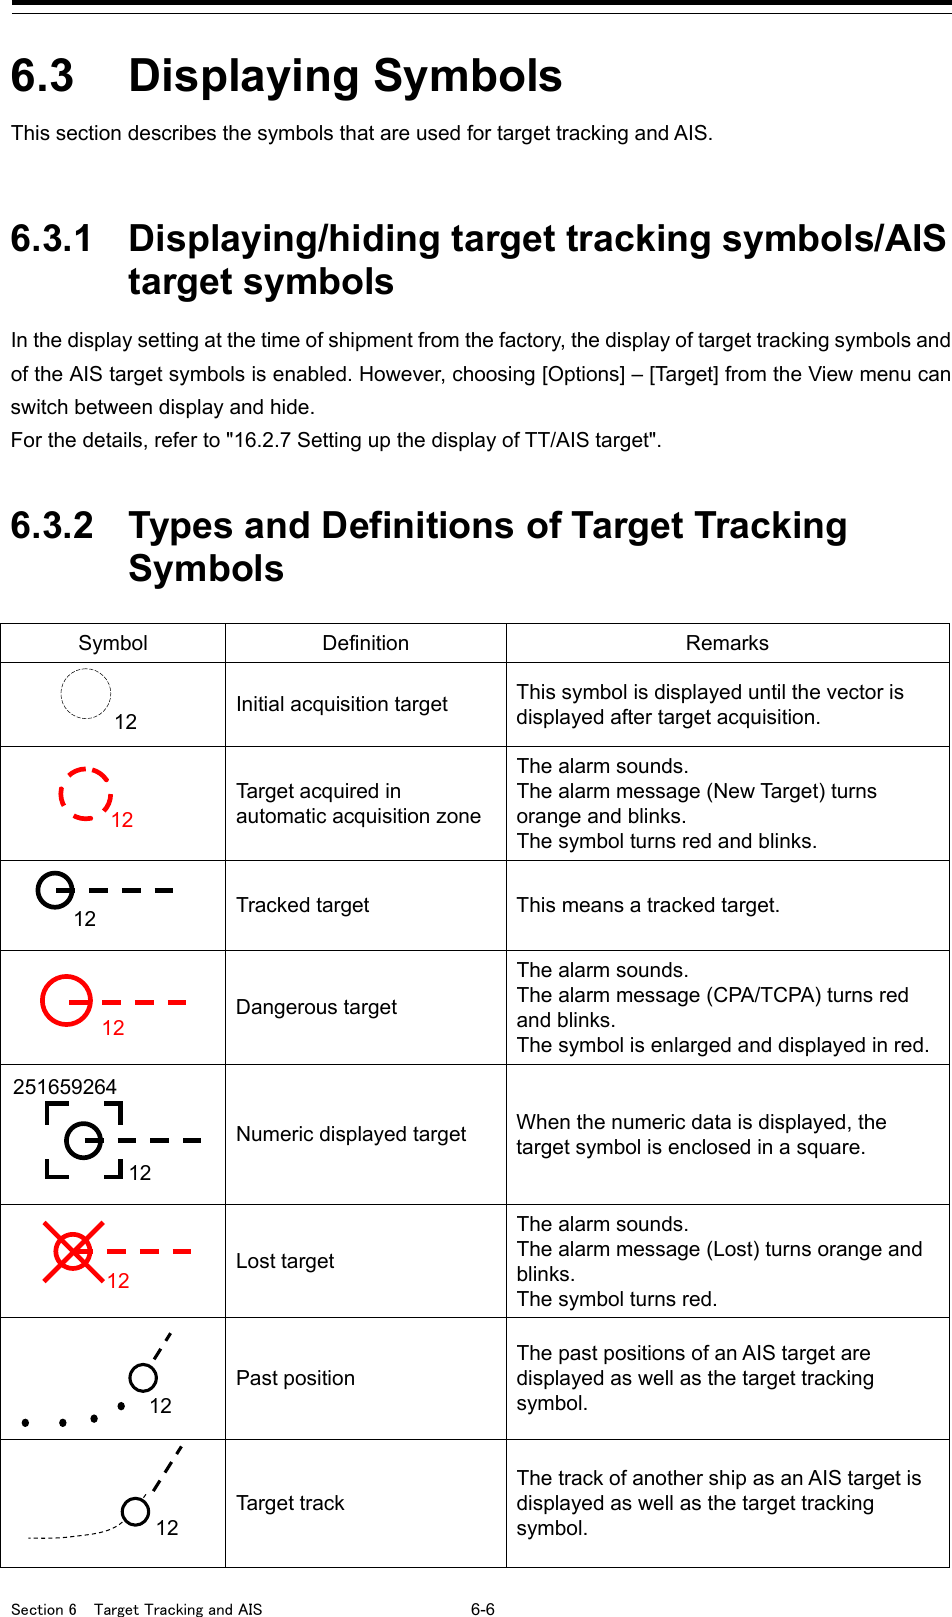  Section 6  Target Tracking and AIS 6-6  6.3  Displaying Symbols This section describes the symbols that are used for target tracking and AIS.   6.3.1 Displaying/hiding target tracking symbols/AIS target symbols In the display setting at the time of shipment from the factory, the display of target tracking symbols and of the AIS target symbols is enabled. However, choosing [Options] – [Target] from the View menu can switch between display and hide. For the details, refer to &quot;16.2.7 Setting up the display of TT/AIS target&quot;.   6.3.2 Types and Definitions of Target Tracking Symbols  Symbol Definition Remarks  Initial acquisition target This symbol is displayed until the vector is displayed after target acquisition.  Target acquired in automatic acquisition zone The alarm sounds. The alarm message (New Target) turns orange and blinks. The symbol turns red and blinks.  Tracked target   This means a tracked target.  Dangerous target The alarm sounds. The alarm message (CPA/TCPA) turns red and blinks. The symbol is enlarged and displayed in red.  Numeric displayed target   When the numeric data is displayed, the target symbol is enclosed in a square.  Lost target The alarm sounds. The alarm message (Lost) turns orange and blinks. The symbol turns red.  Past position The past positions of an AIS target are displayed as well as the target tracking symbol.   Target track The track of another ship as an AIS target is displayed as well as the target tracking symbol.   12   12       12     12 251659264  12  12  12  12 